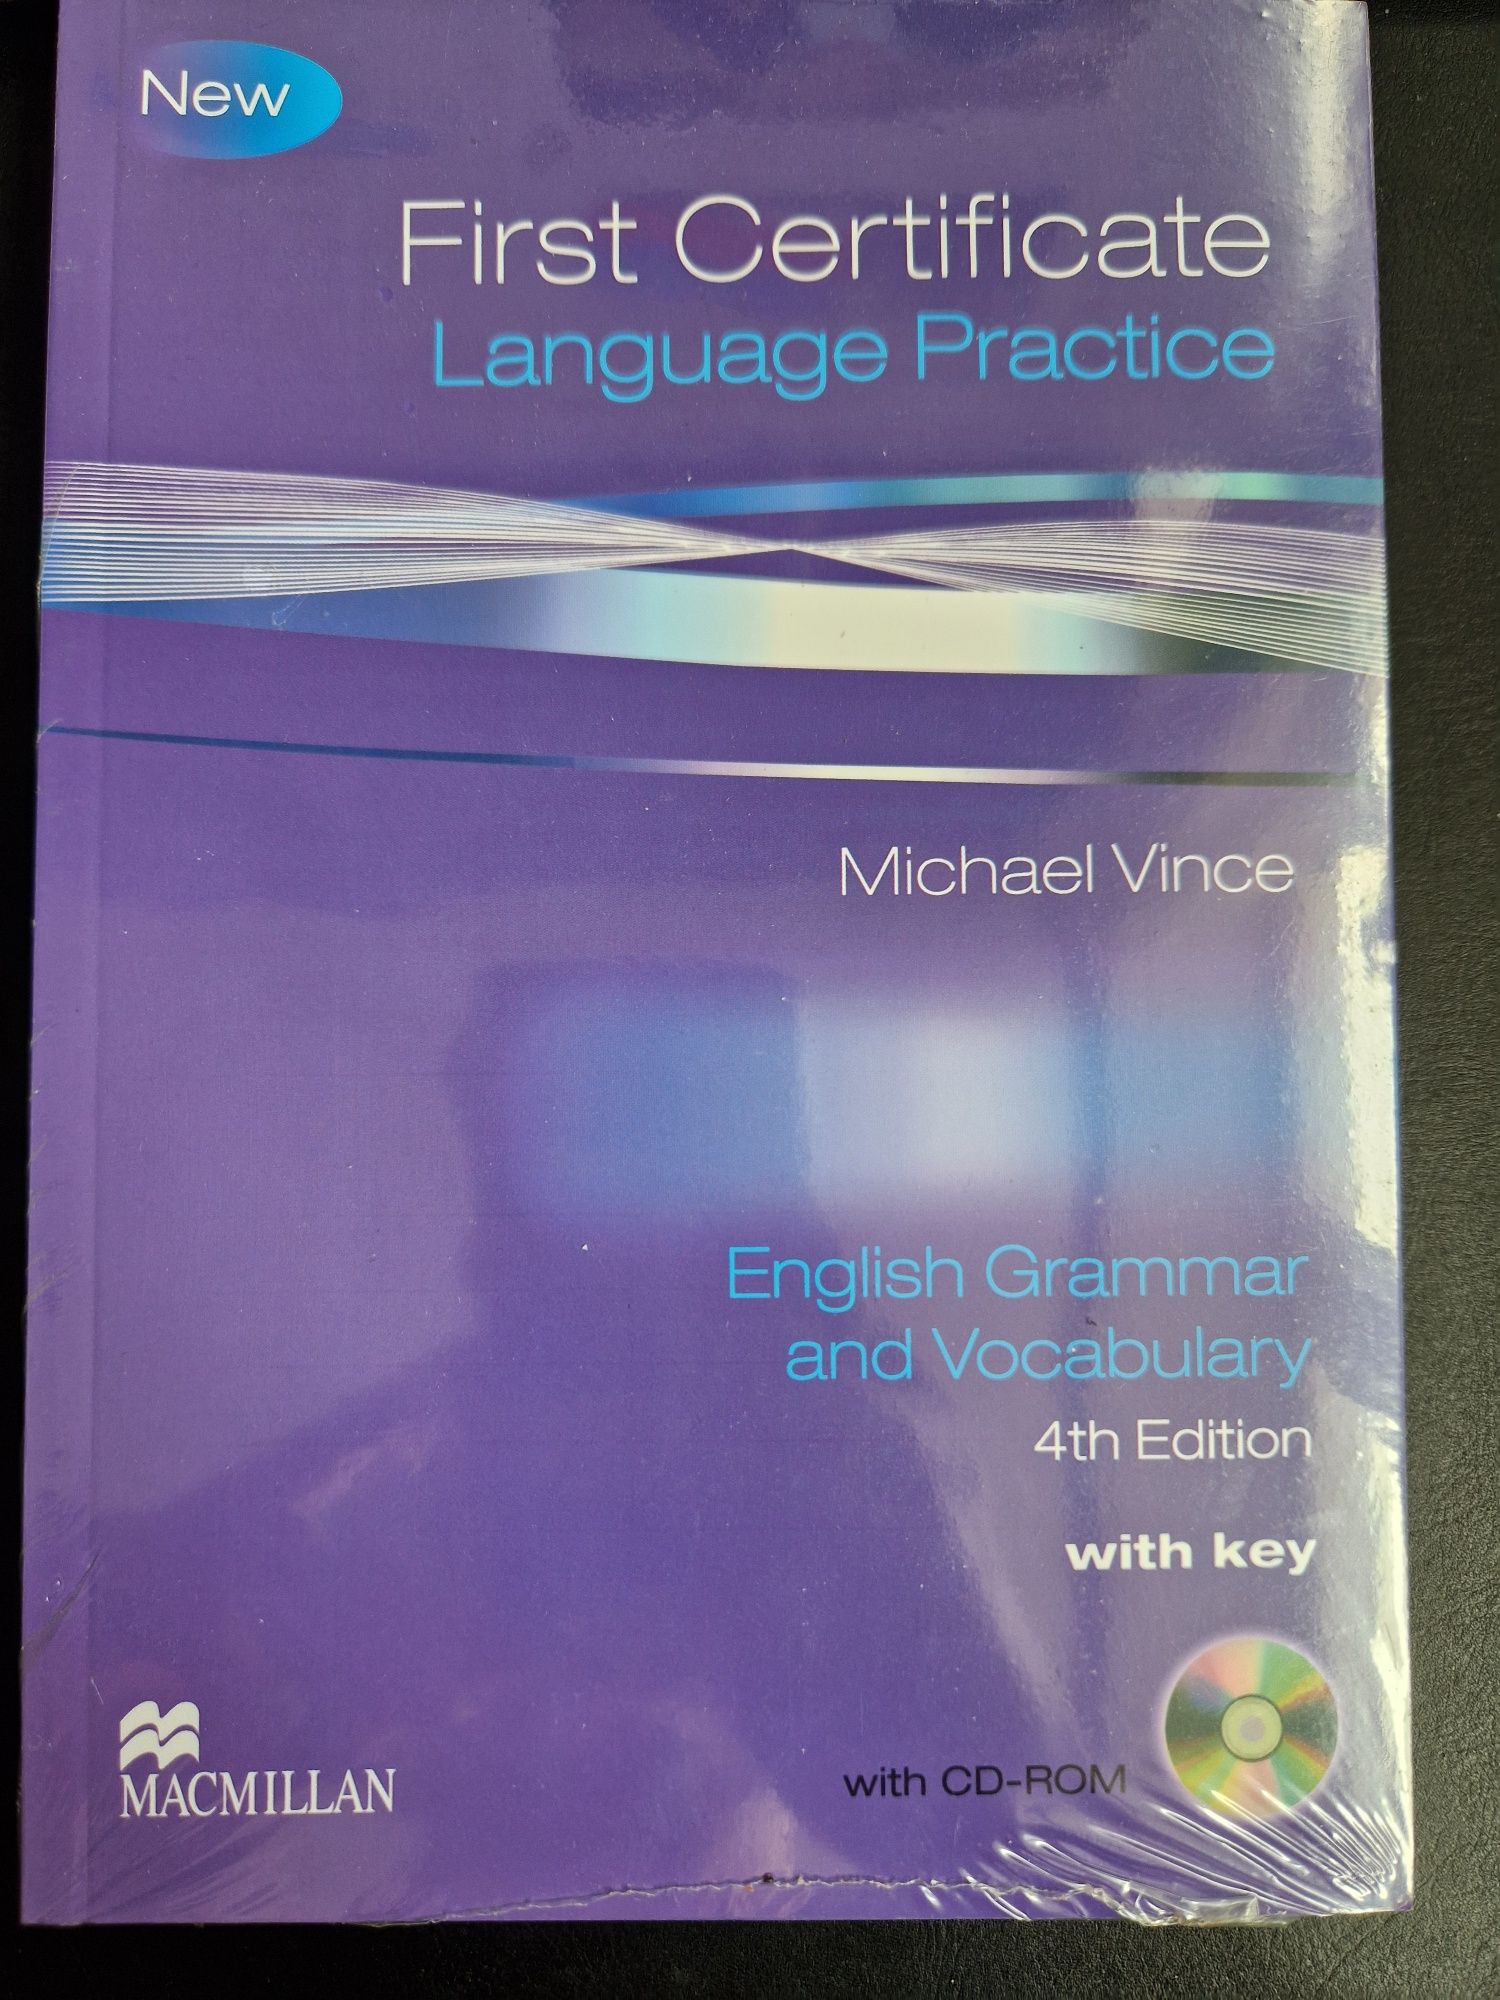 Firts Certificate Language Practice